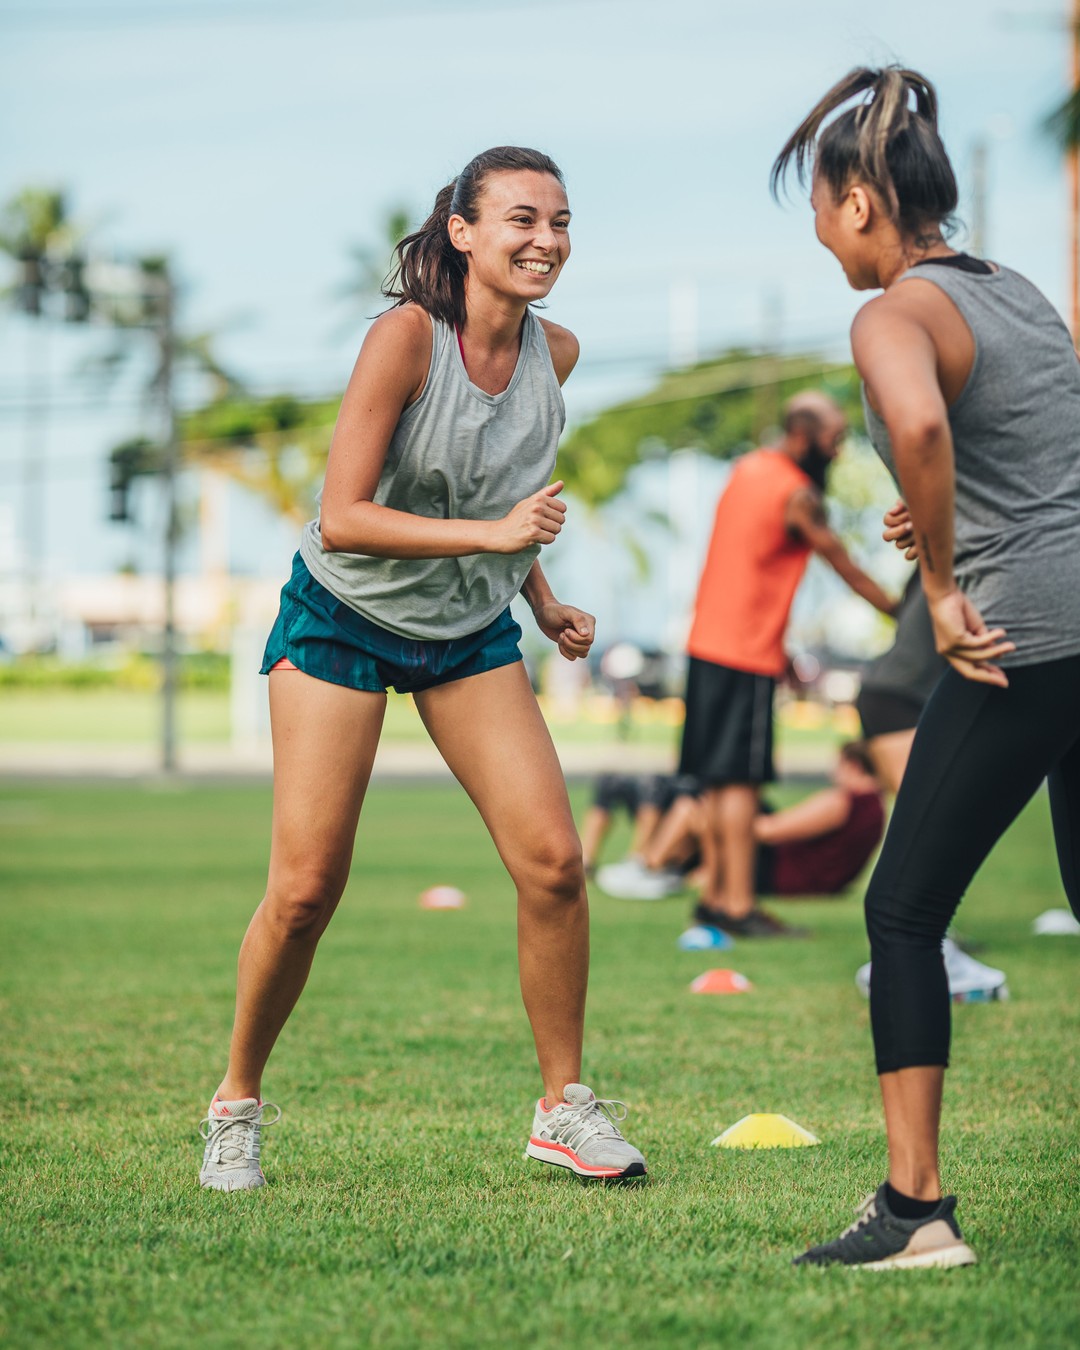 Fitness in the Park is going down tomorrow morning (Sat. 9/21)!  This week, our new neighbors from the Straub Medical Center – Ward Village Clinic & Urgent Care are sweating it out with us. Straub Physical Therapist Asa Mills will be on hand to show us how to cool down post-work-out. Make sure to stop by their tent for free snacks, goodies, and more information about @StraubHealth’s neighborhood clinics and urgent cares.